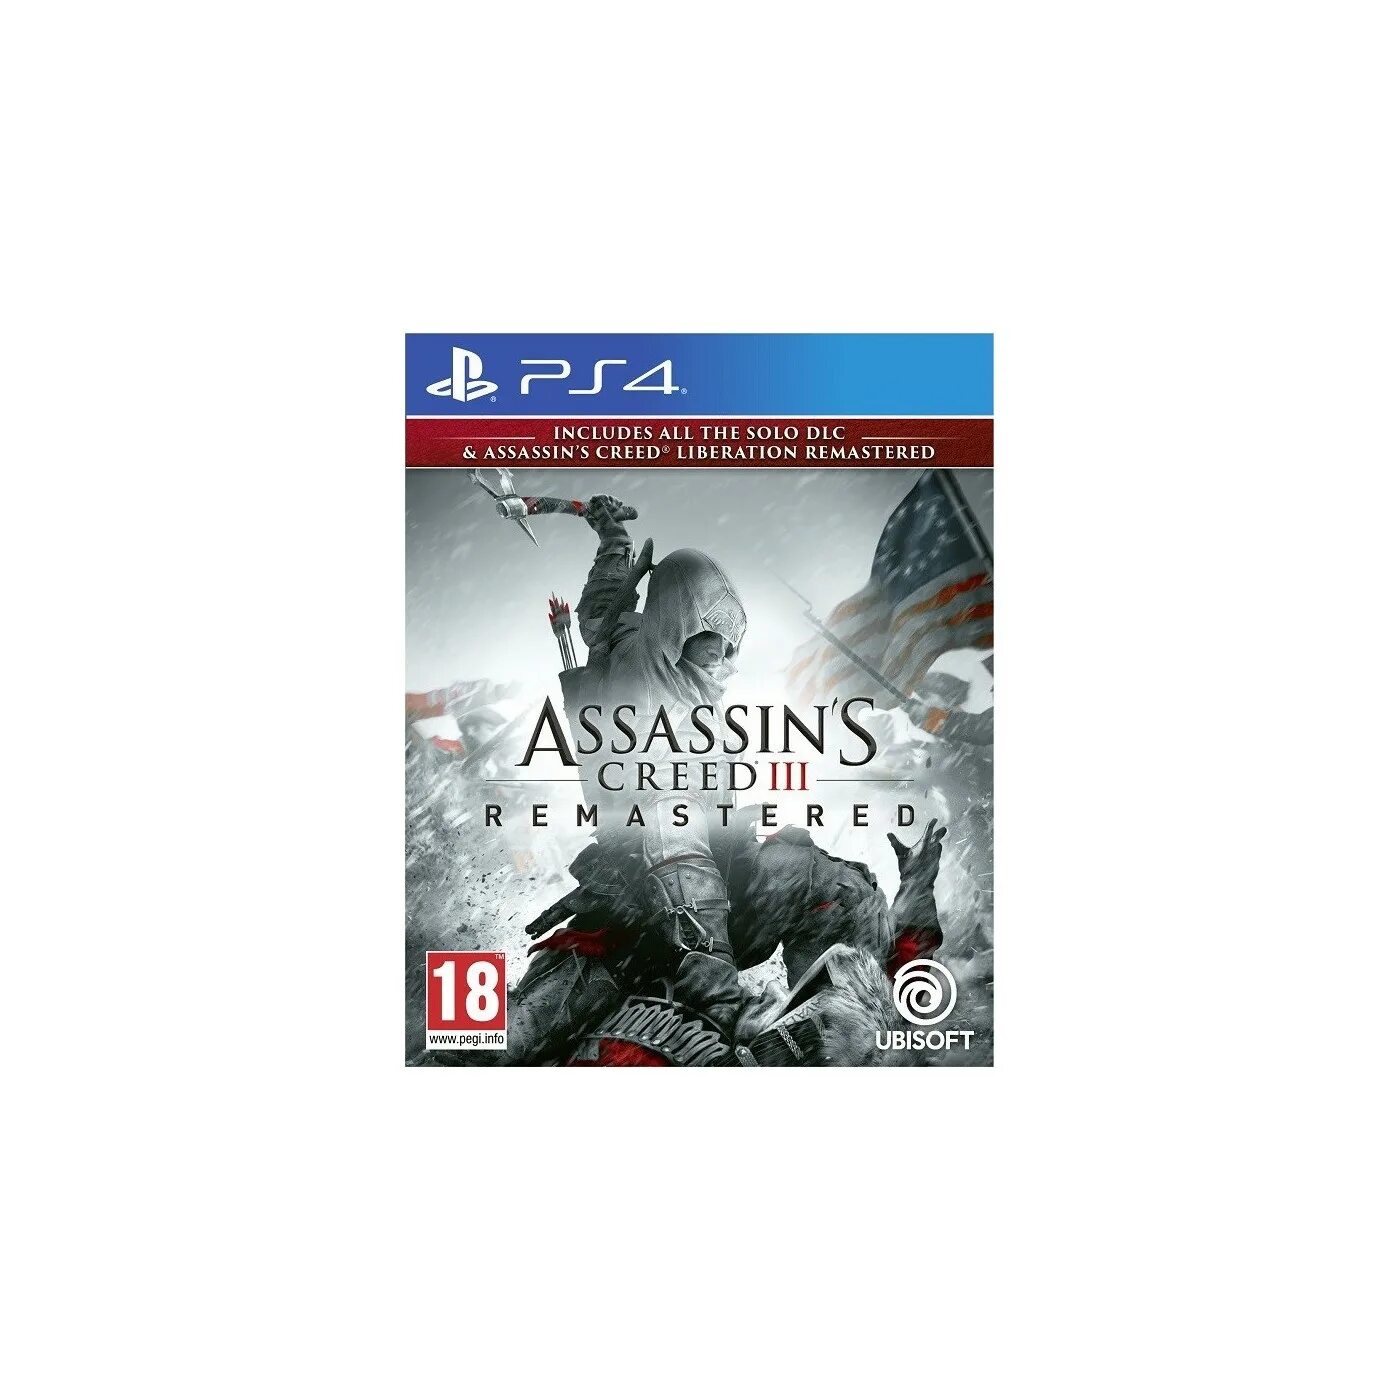 Assassins Creed 3 ps4 Remastered Liberation. Ассасин Крид освобождение ps4. Assassin's Creed III Remastered обложка ps4. Assassin's Creed 3 ps4 диск.